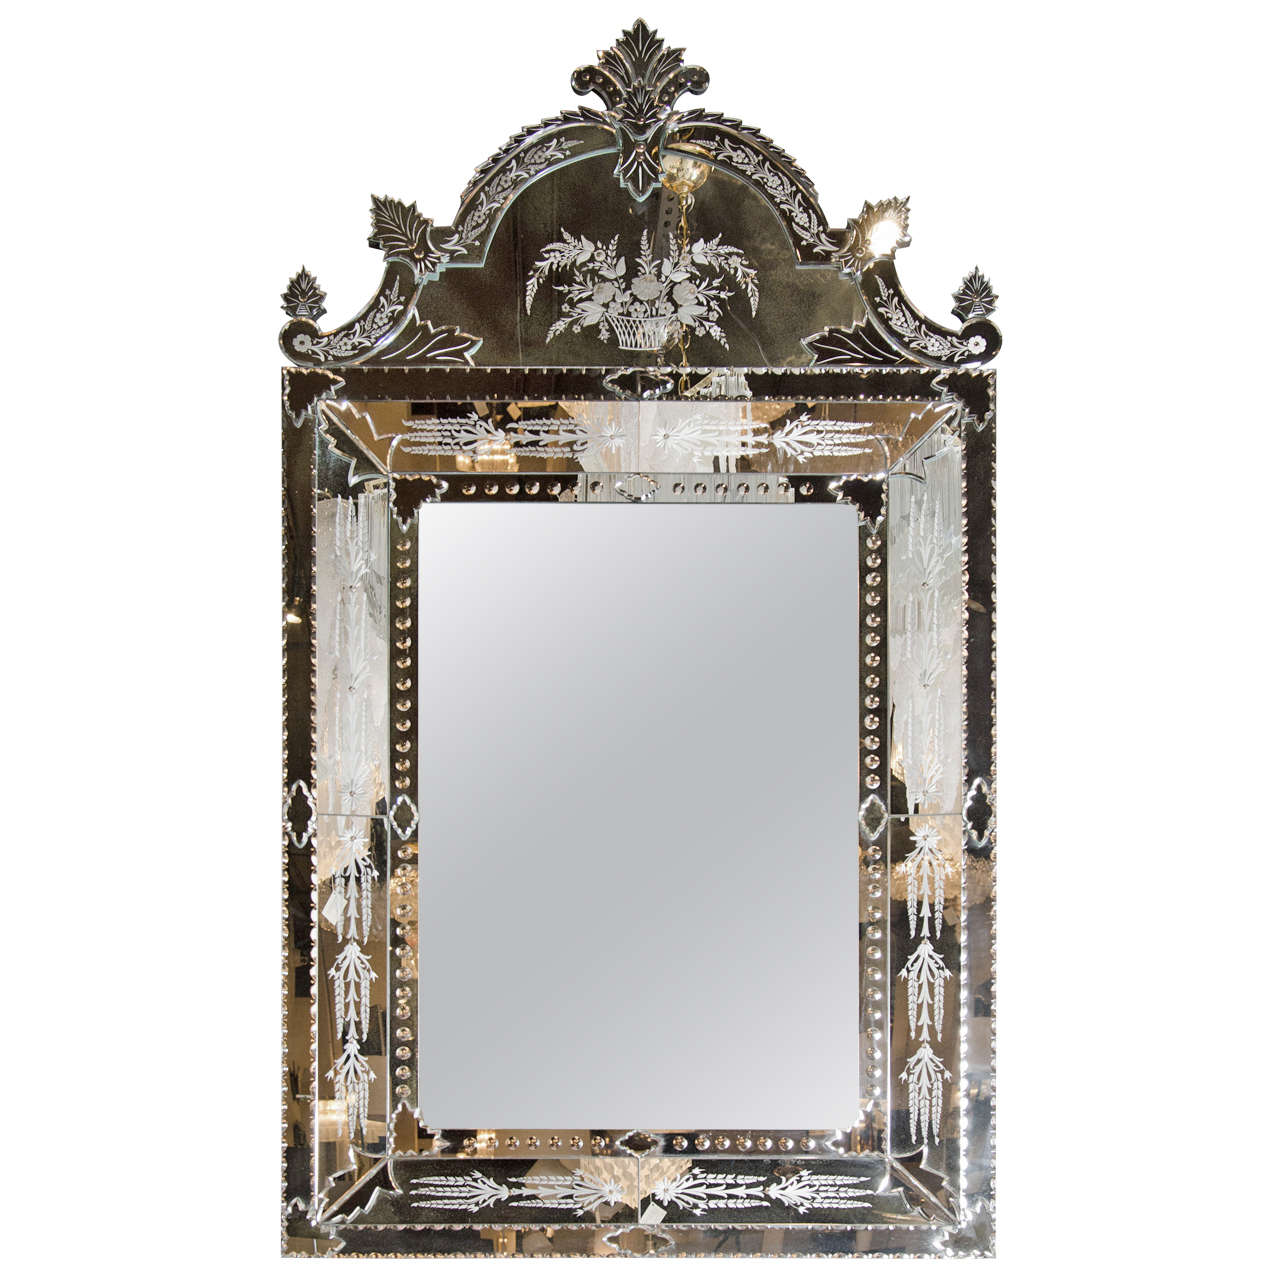 Exquisite Venetian Style Mirror with Stylized Foliage Detailing